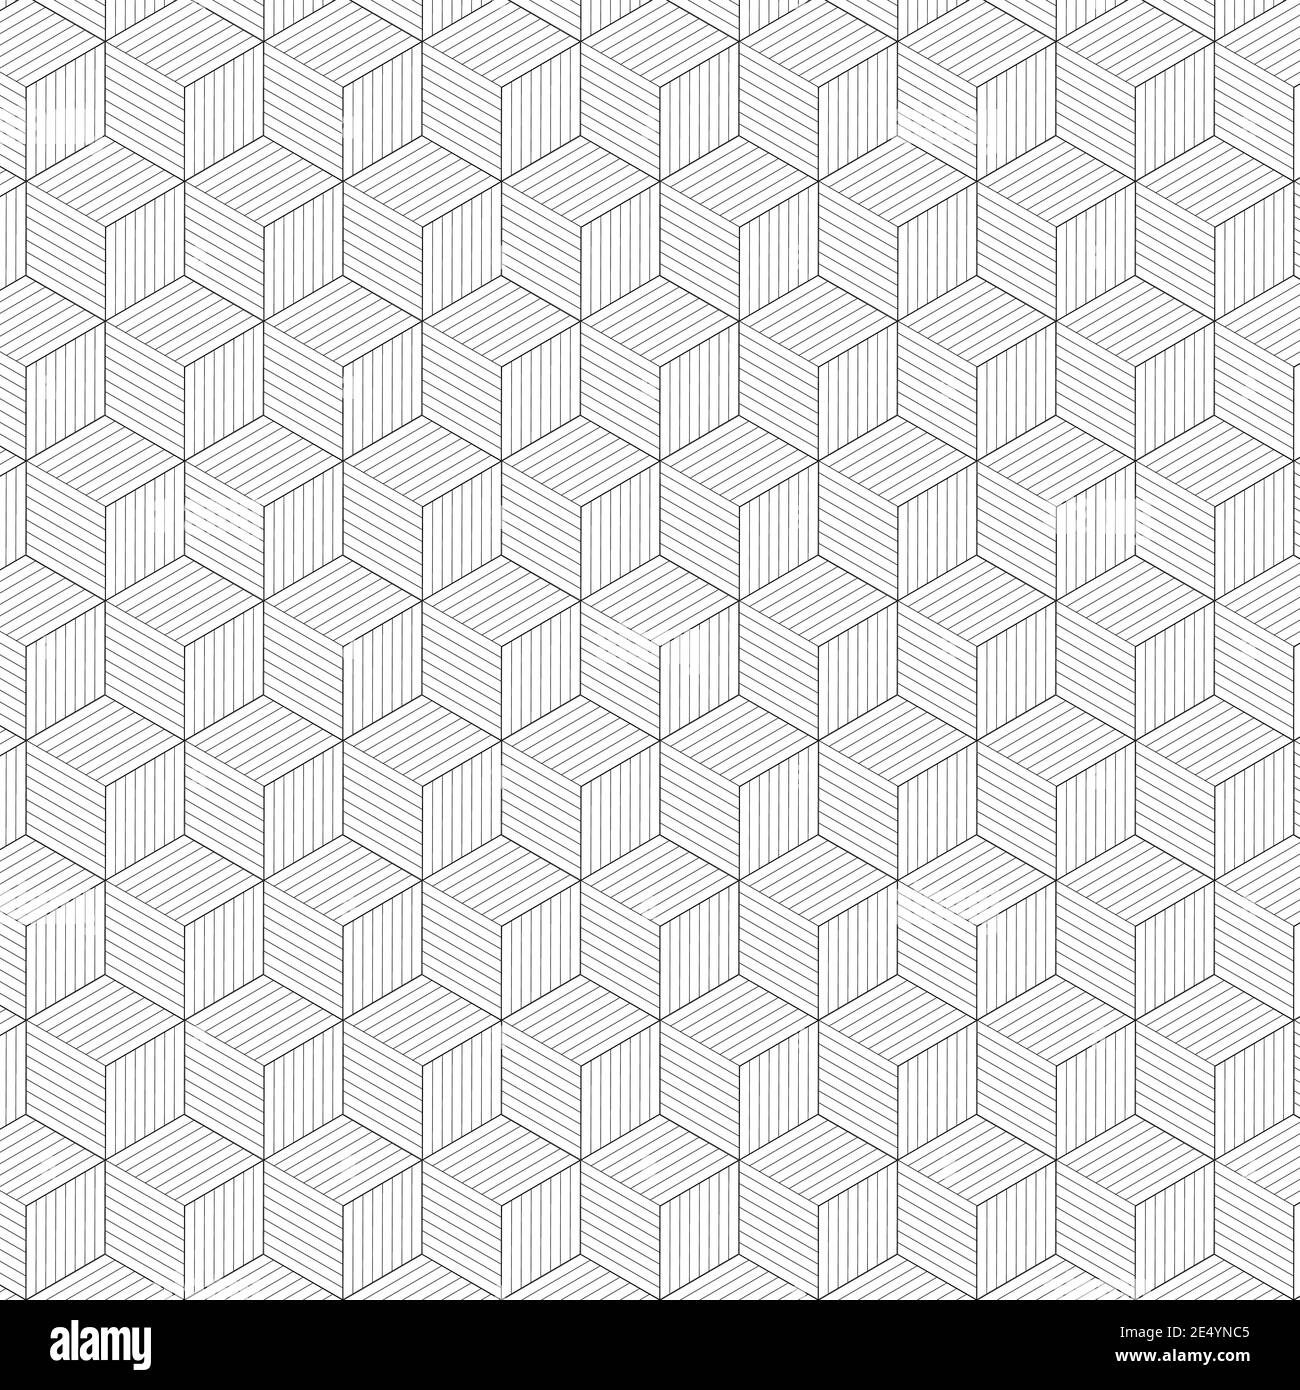 Vector abstract squares background. Modern technological illustration with square mesh. Digital geometric abstraction with lines and dots. Stock Vector